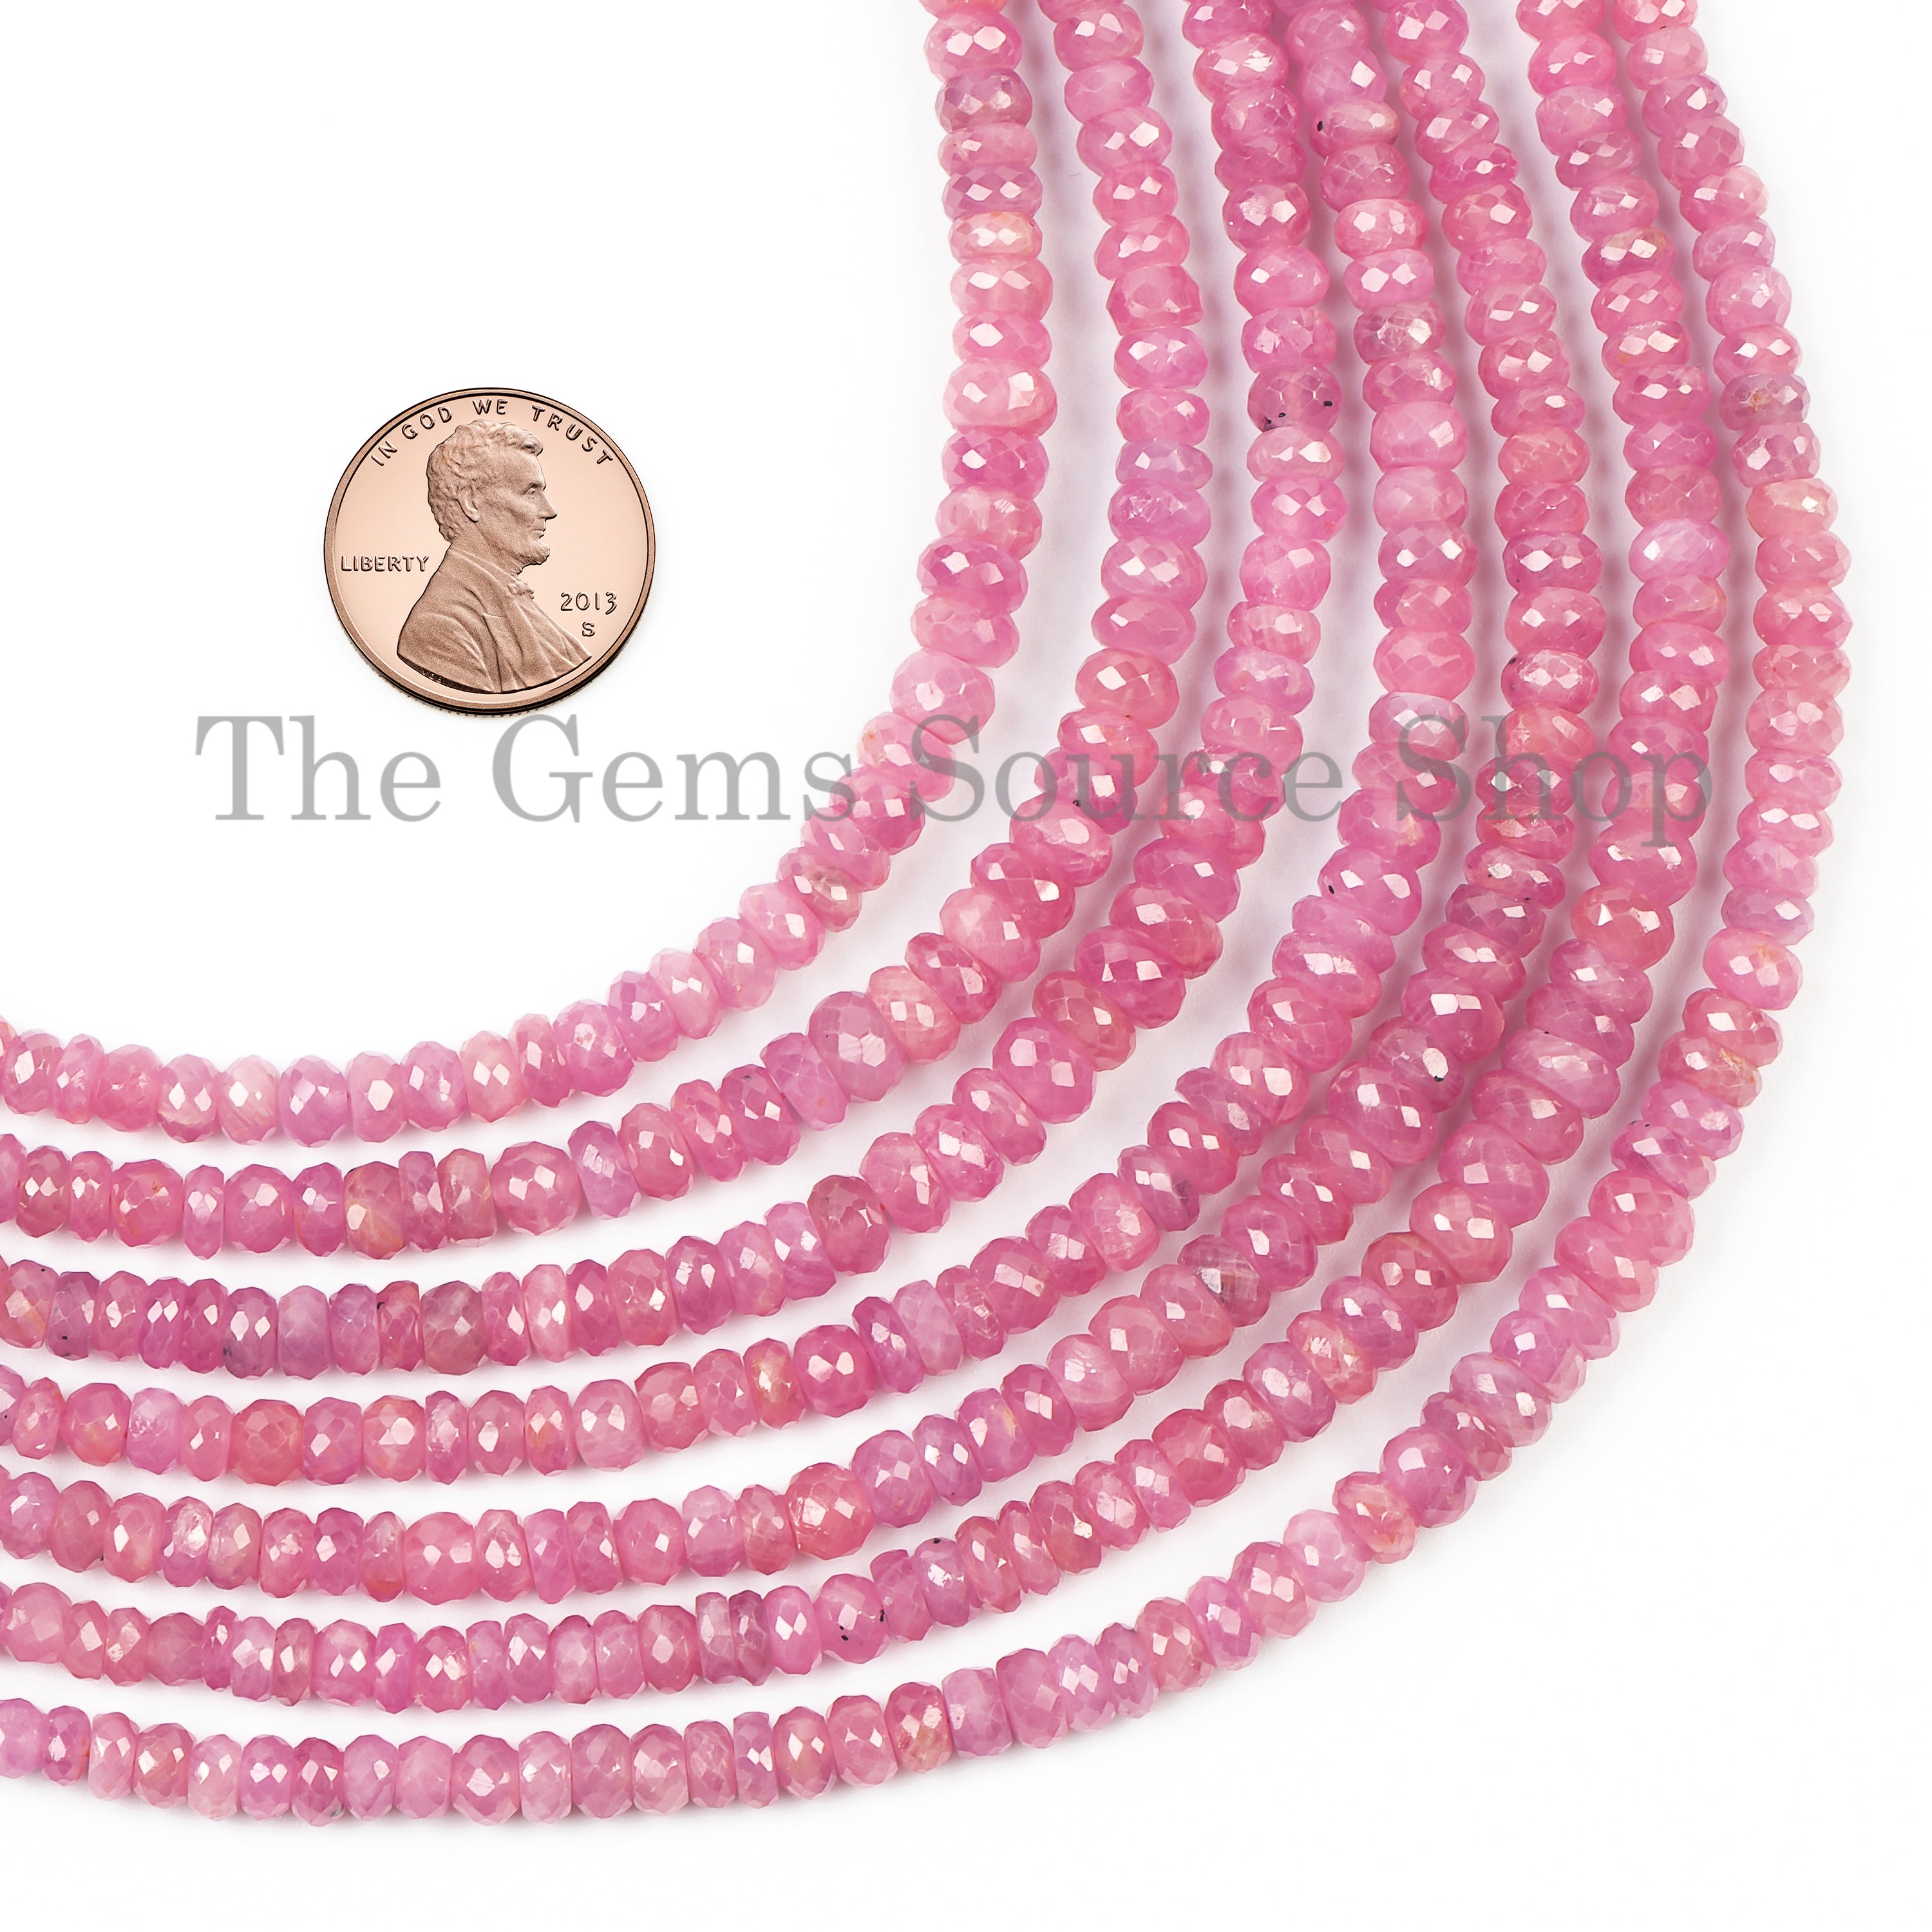 4-6mm Pink Sapphire Beads, Pink Sapphire Faceted Rondelle Beads, Sapphire Rondelle Beads, Faceted Sapphire Beads, Pink Sapphire Gemstone